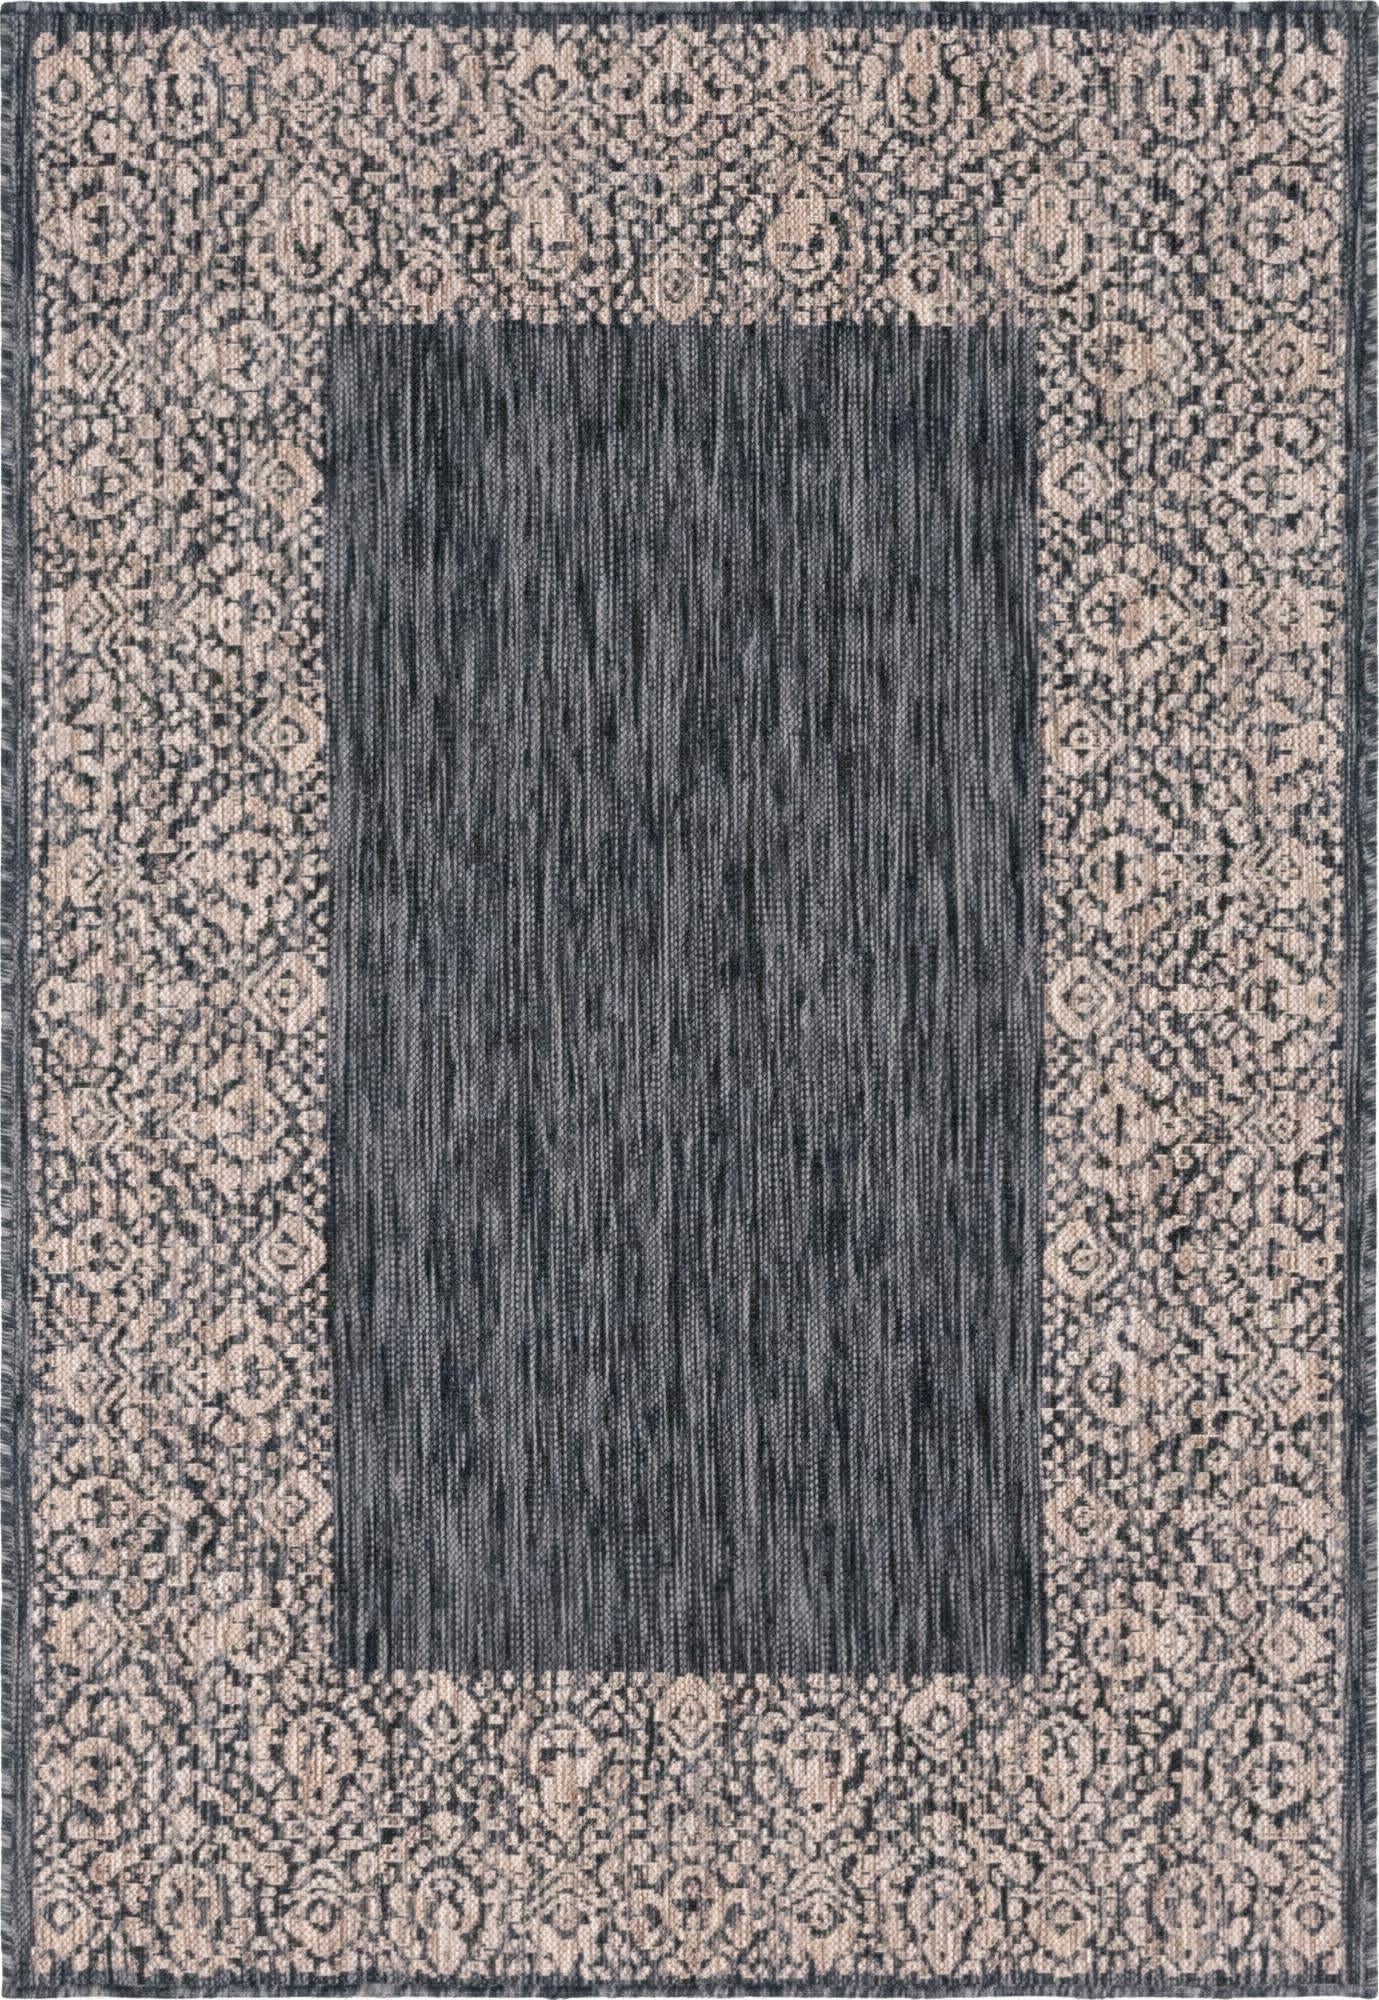 Unique Loom Outdoor Border T-KZOD1 Charcoal Gray Area Rug main image